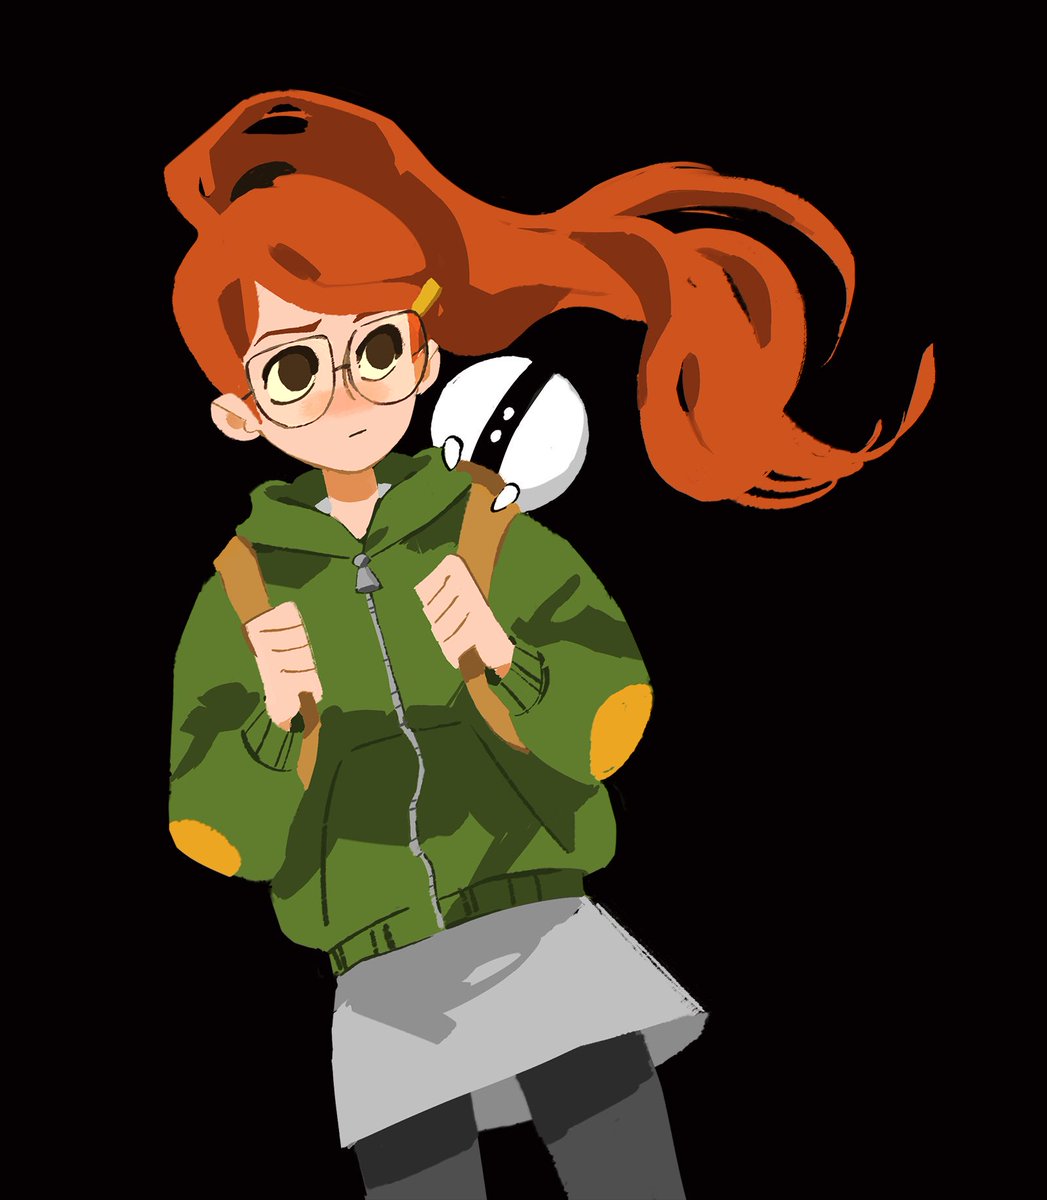 I love her💛 can't wait for season 2 #InfinityTrain 